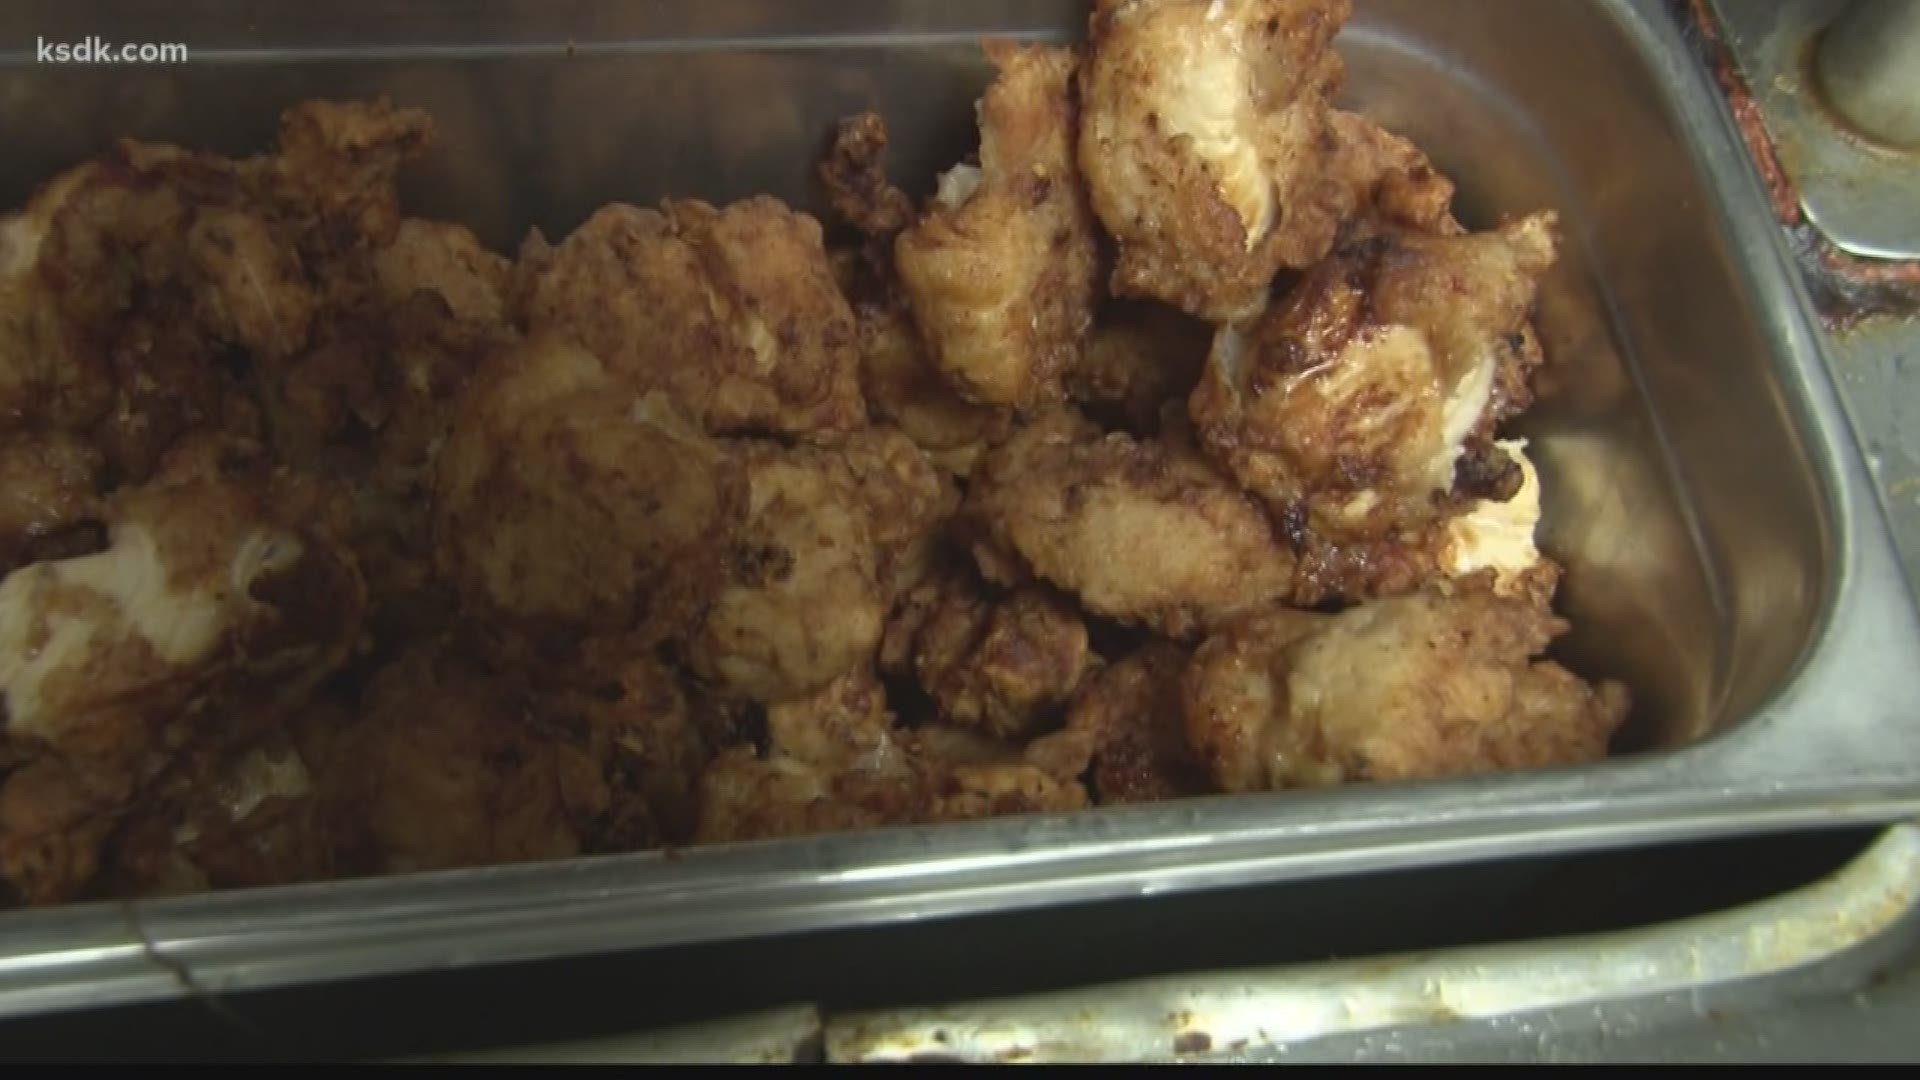 The fried chicken is on a different level. The preparation to make it great is an art form.